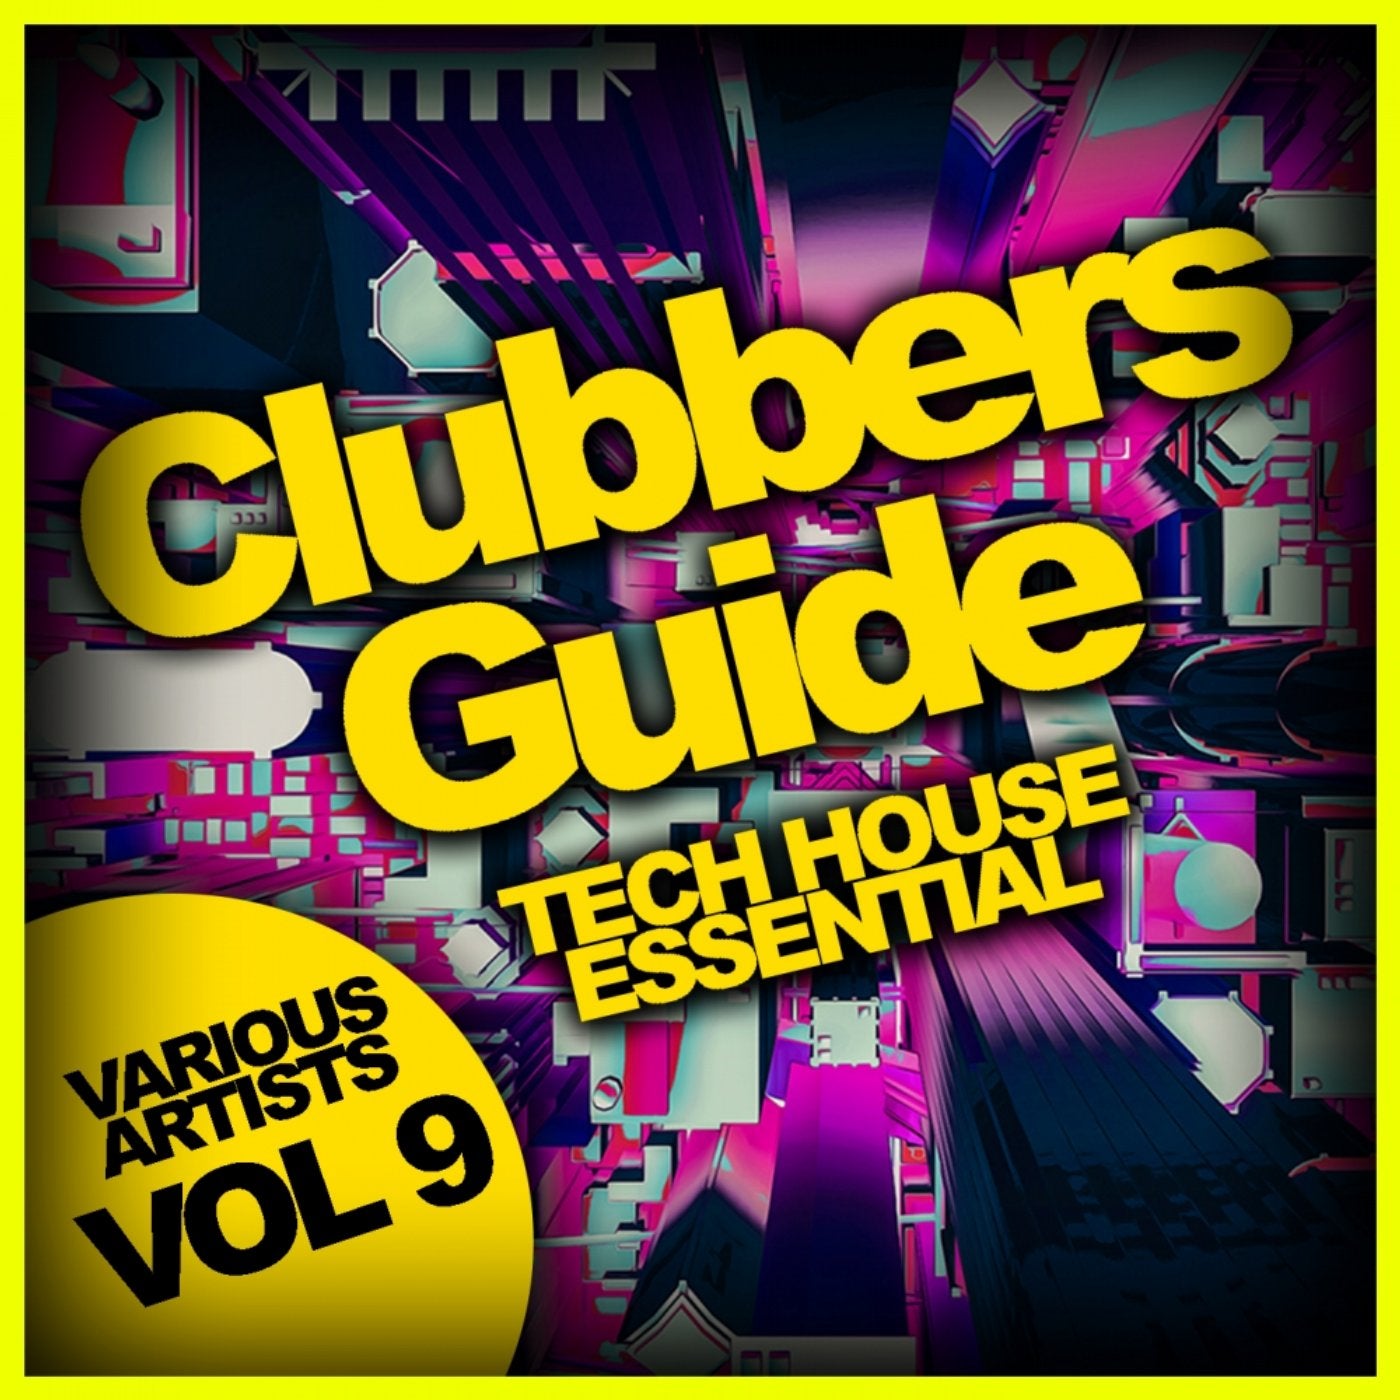 Clubbers Guide, Vol. 9: Tech House Essential